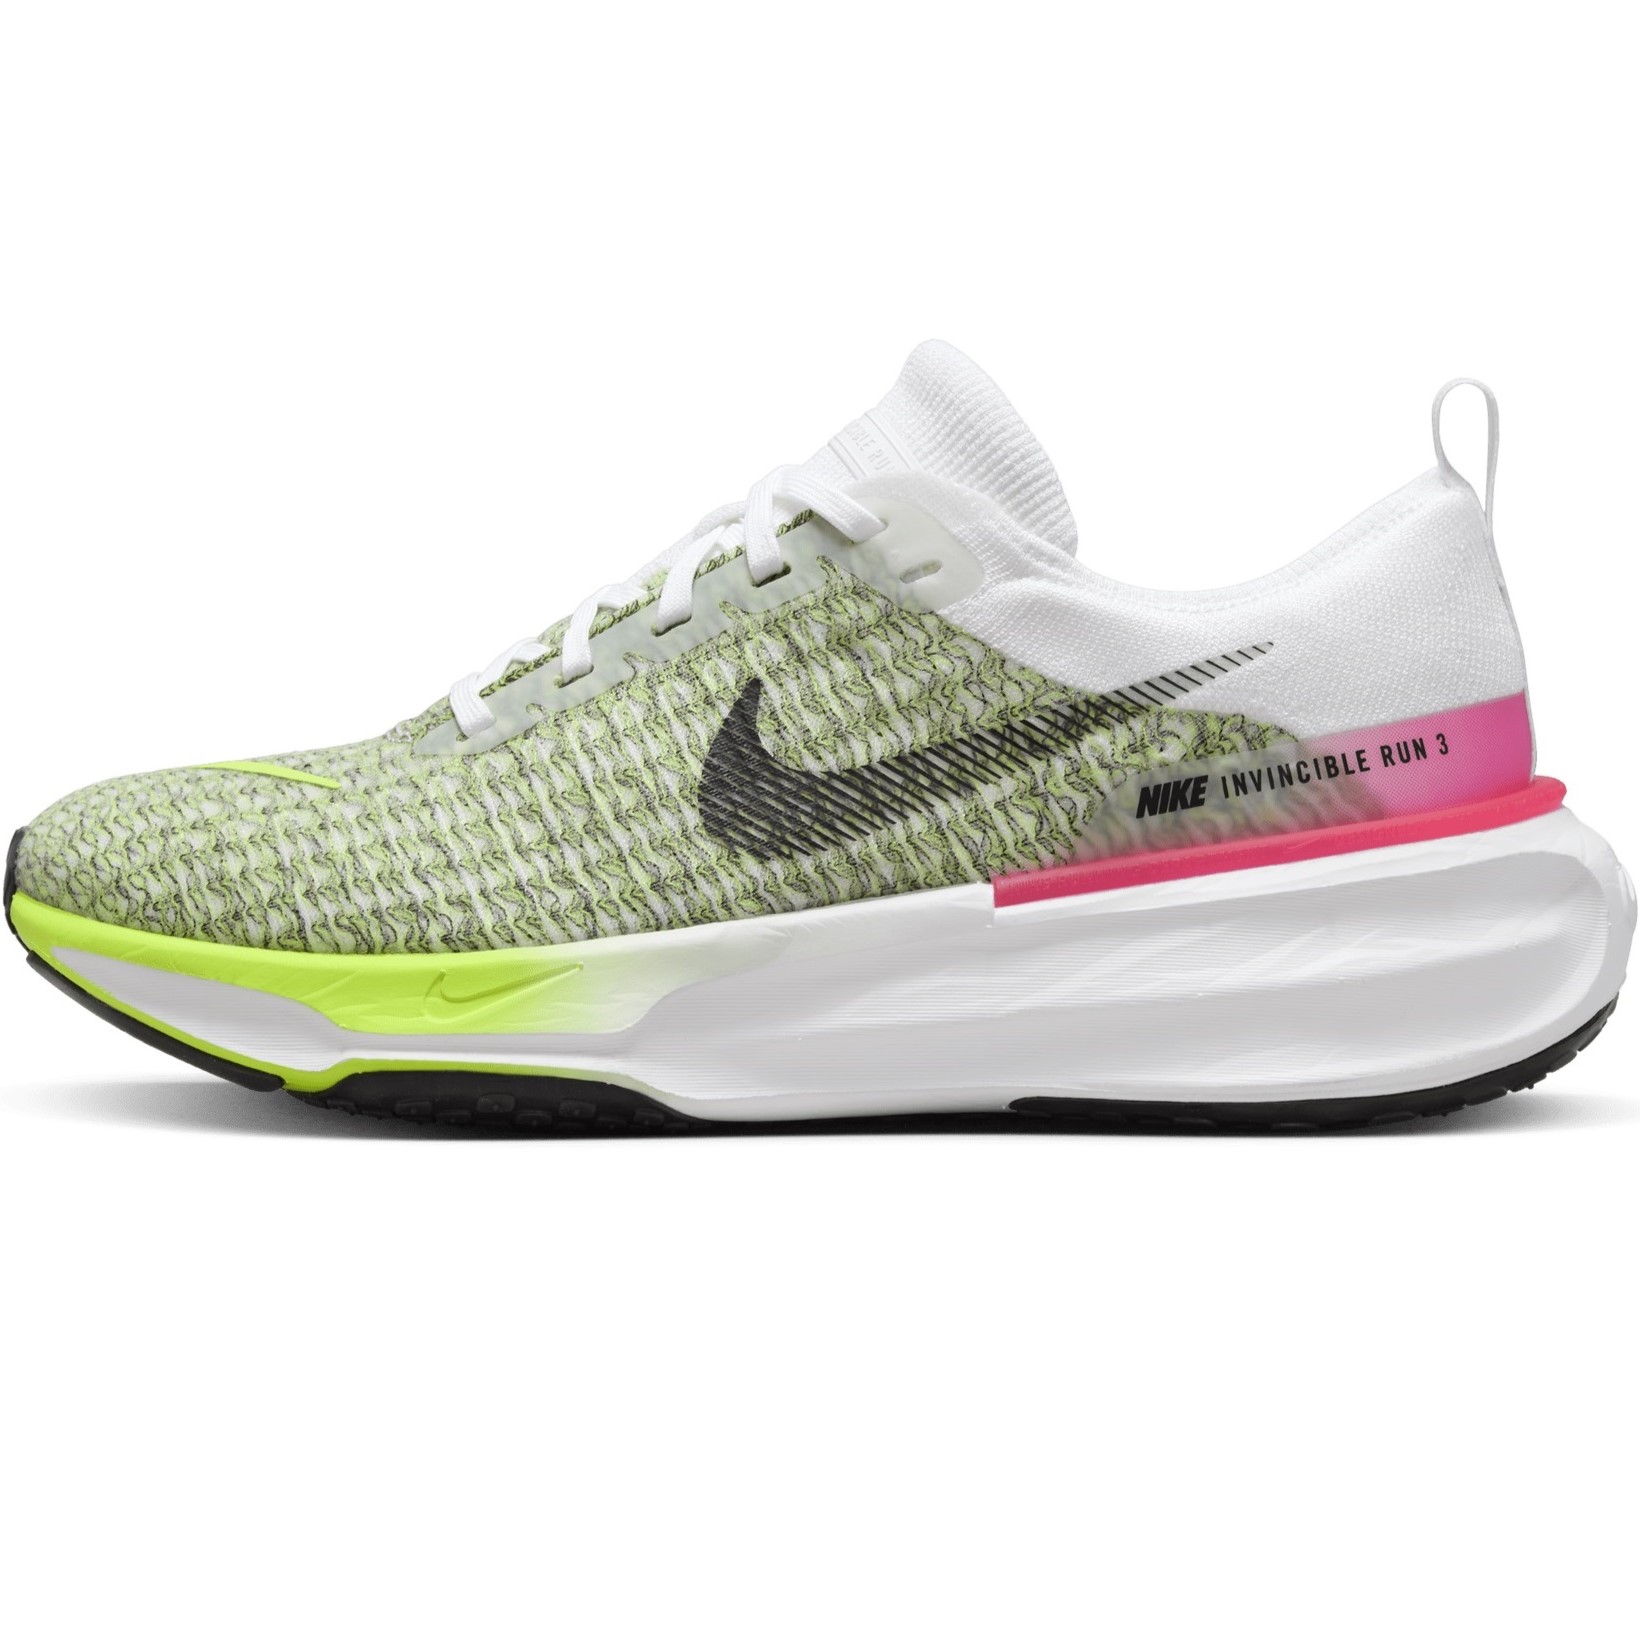 GIÀY CHAY BỘ NIKE NỮ WOMENS ZOOMX INVINCIBLE 3 ROAD RUNNING SHOES WHITE VOLT HYPER PINK FN6821-100 5